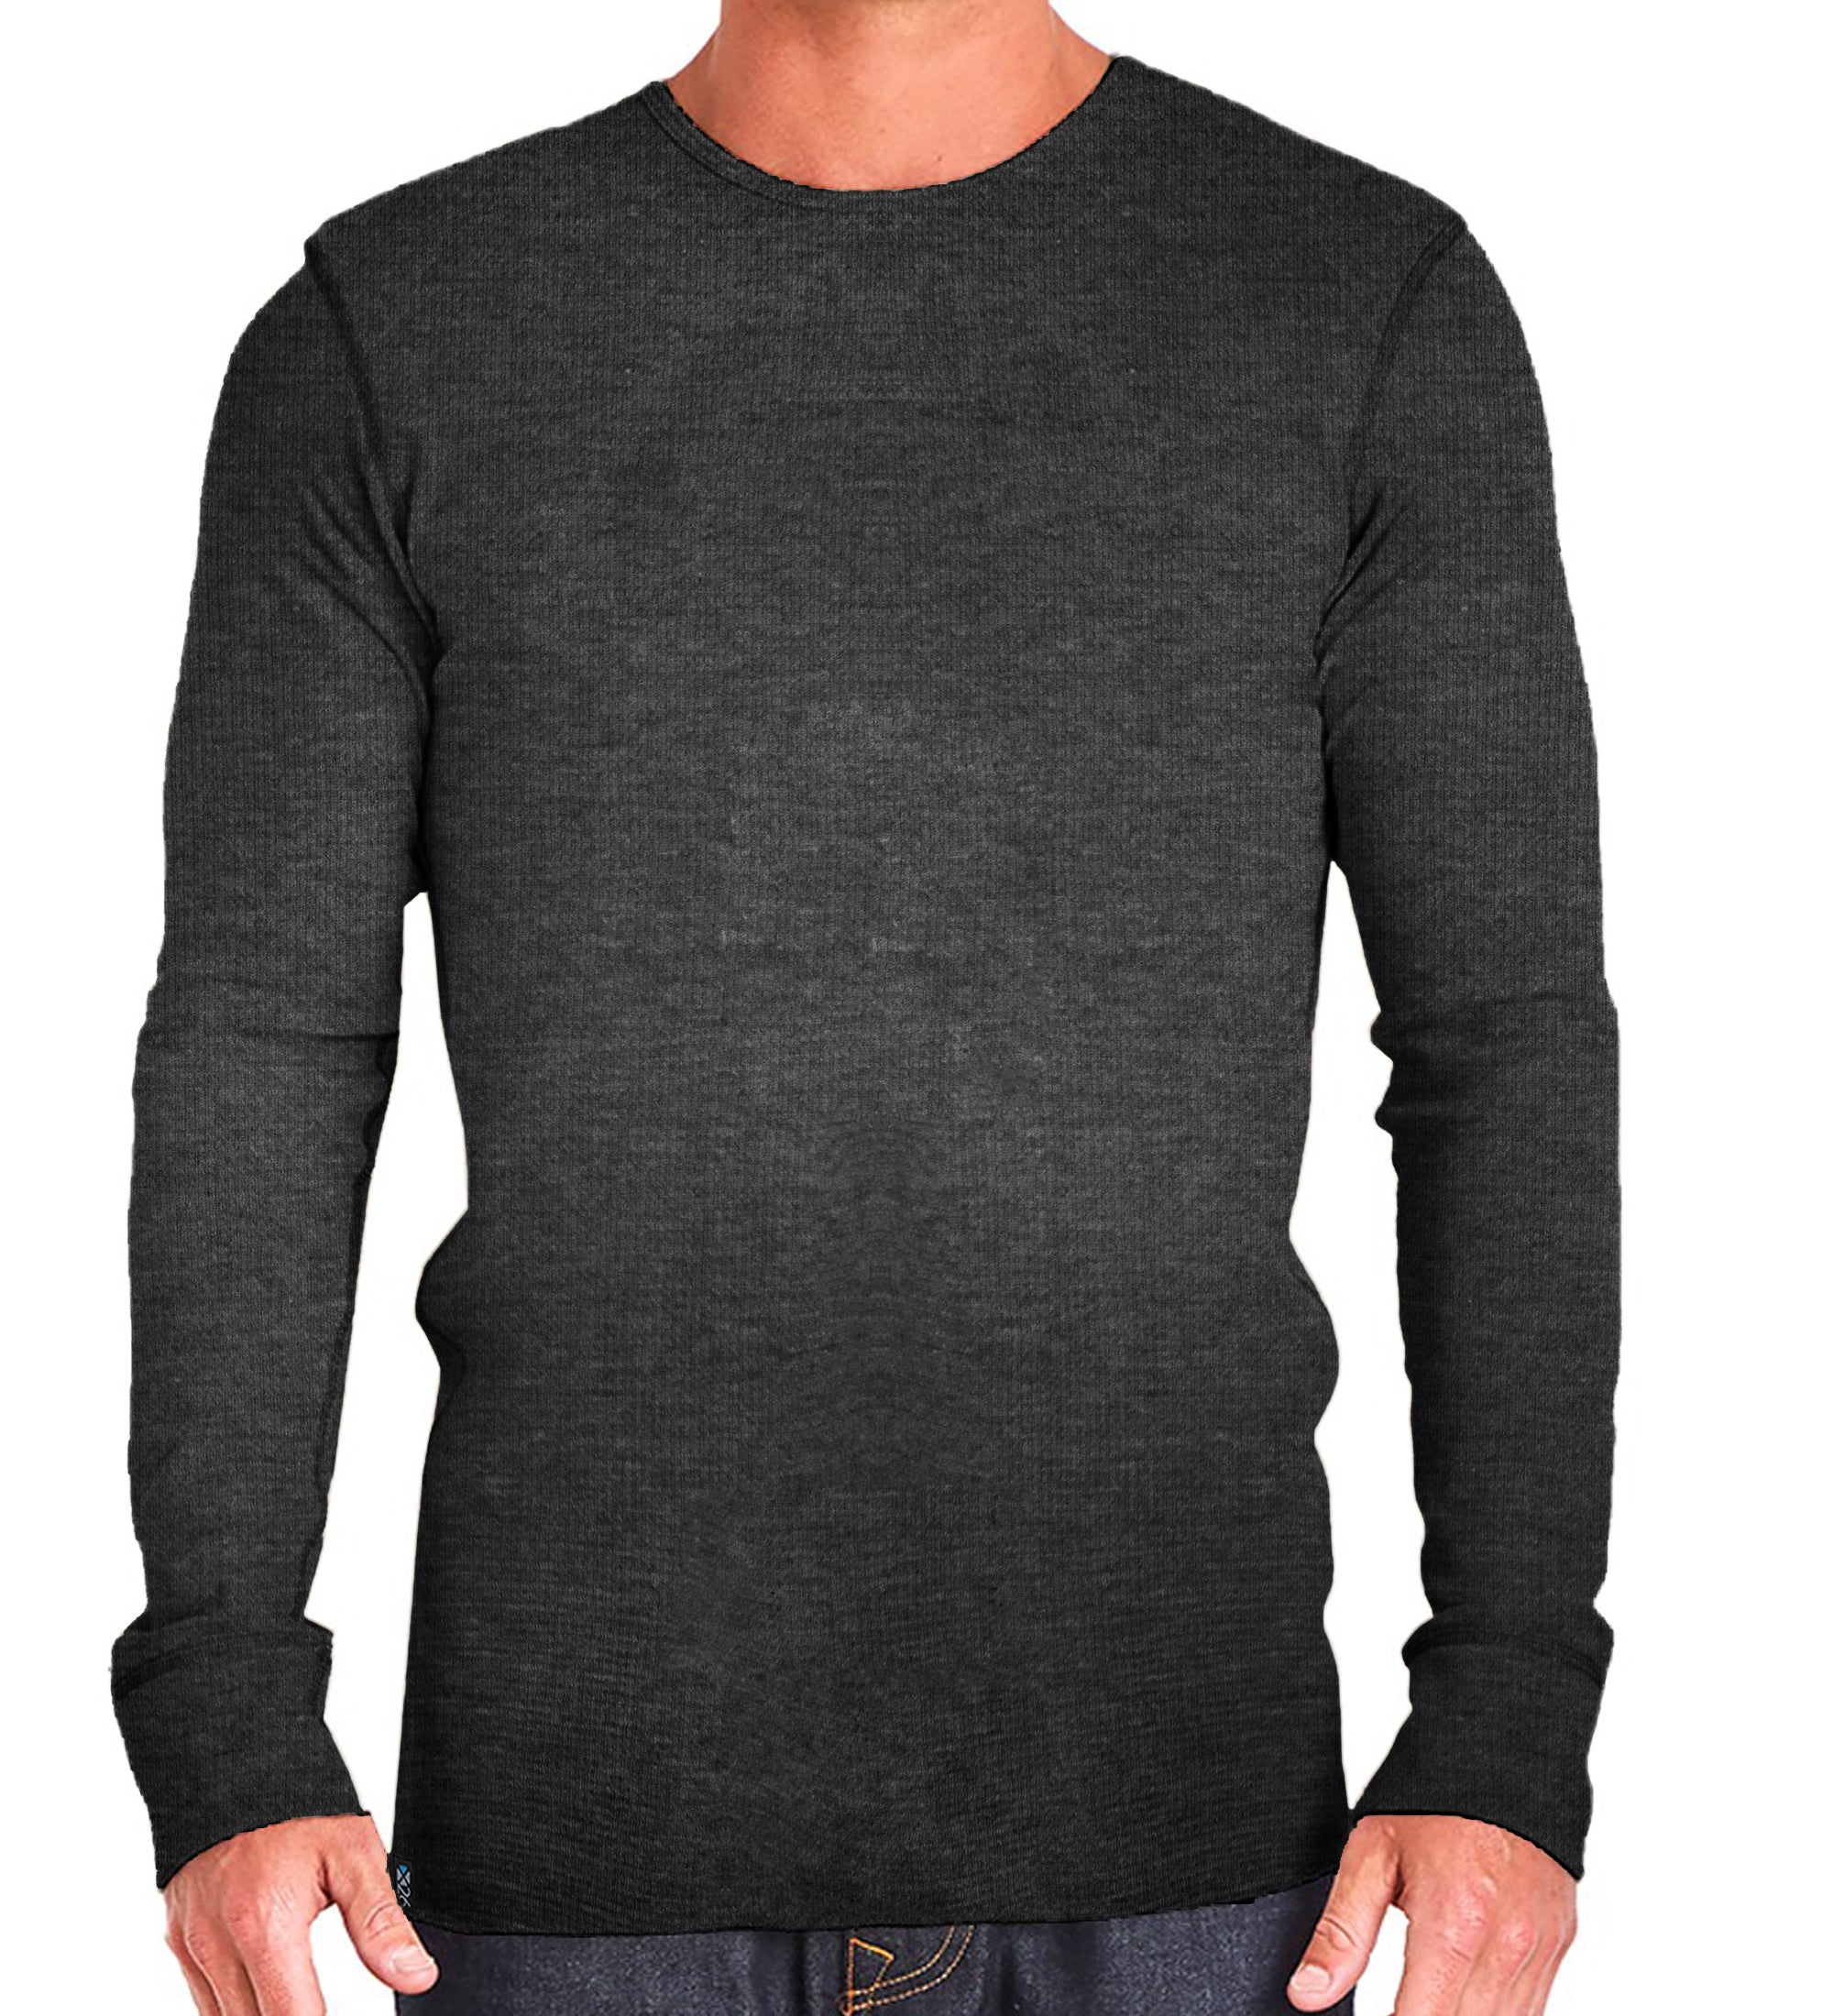 Thermal Waffle Knit Crew Neck Long Sleeve T-Shirt – Exit 26 Apparel